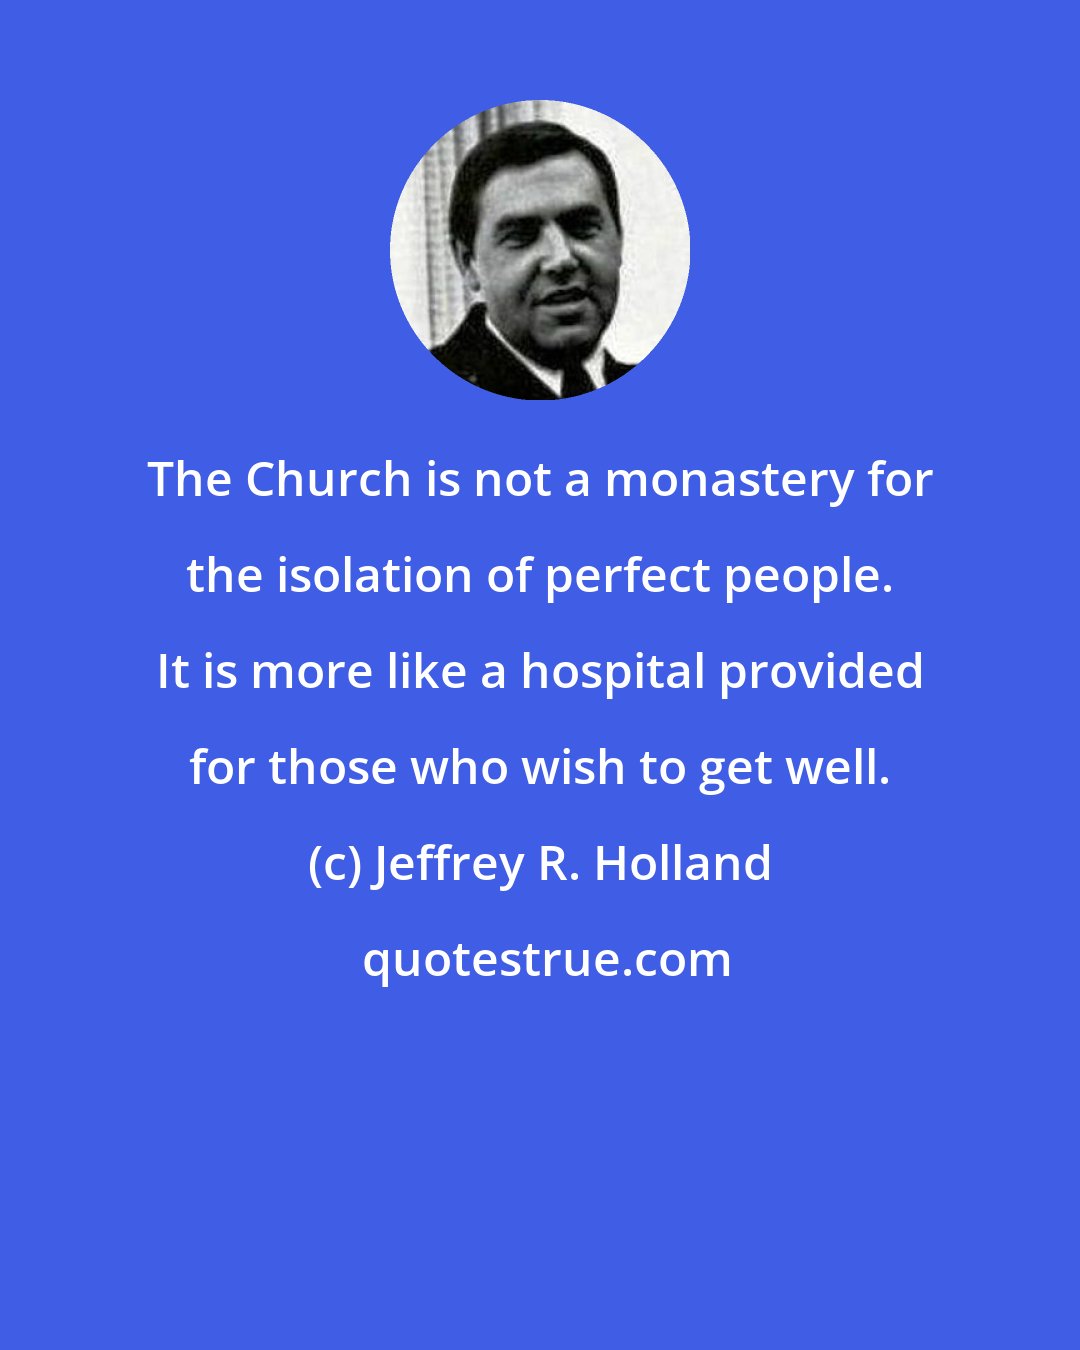 Jeffrey R. Holland: The Church is not a monastery for the isolation of perfect people. It is more like a hospital provided for those who wish to get well.